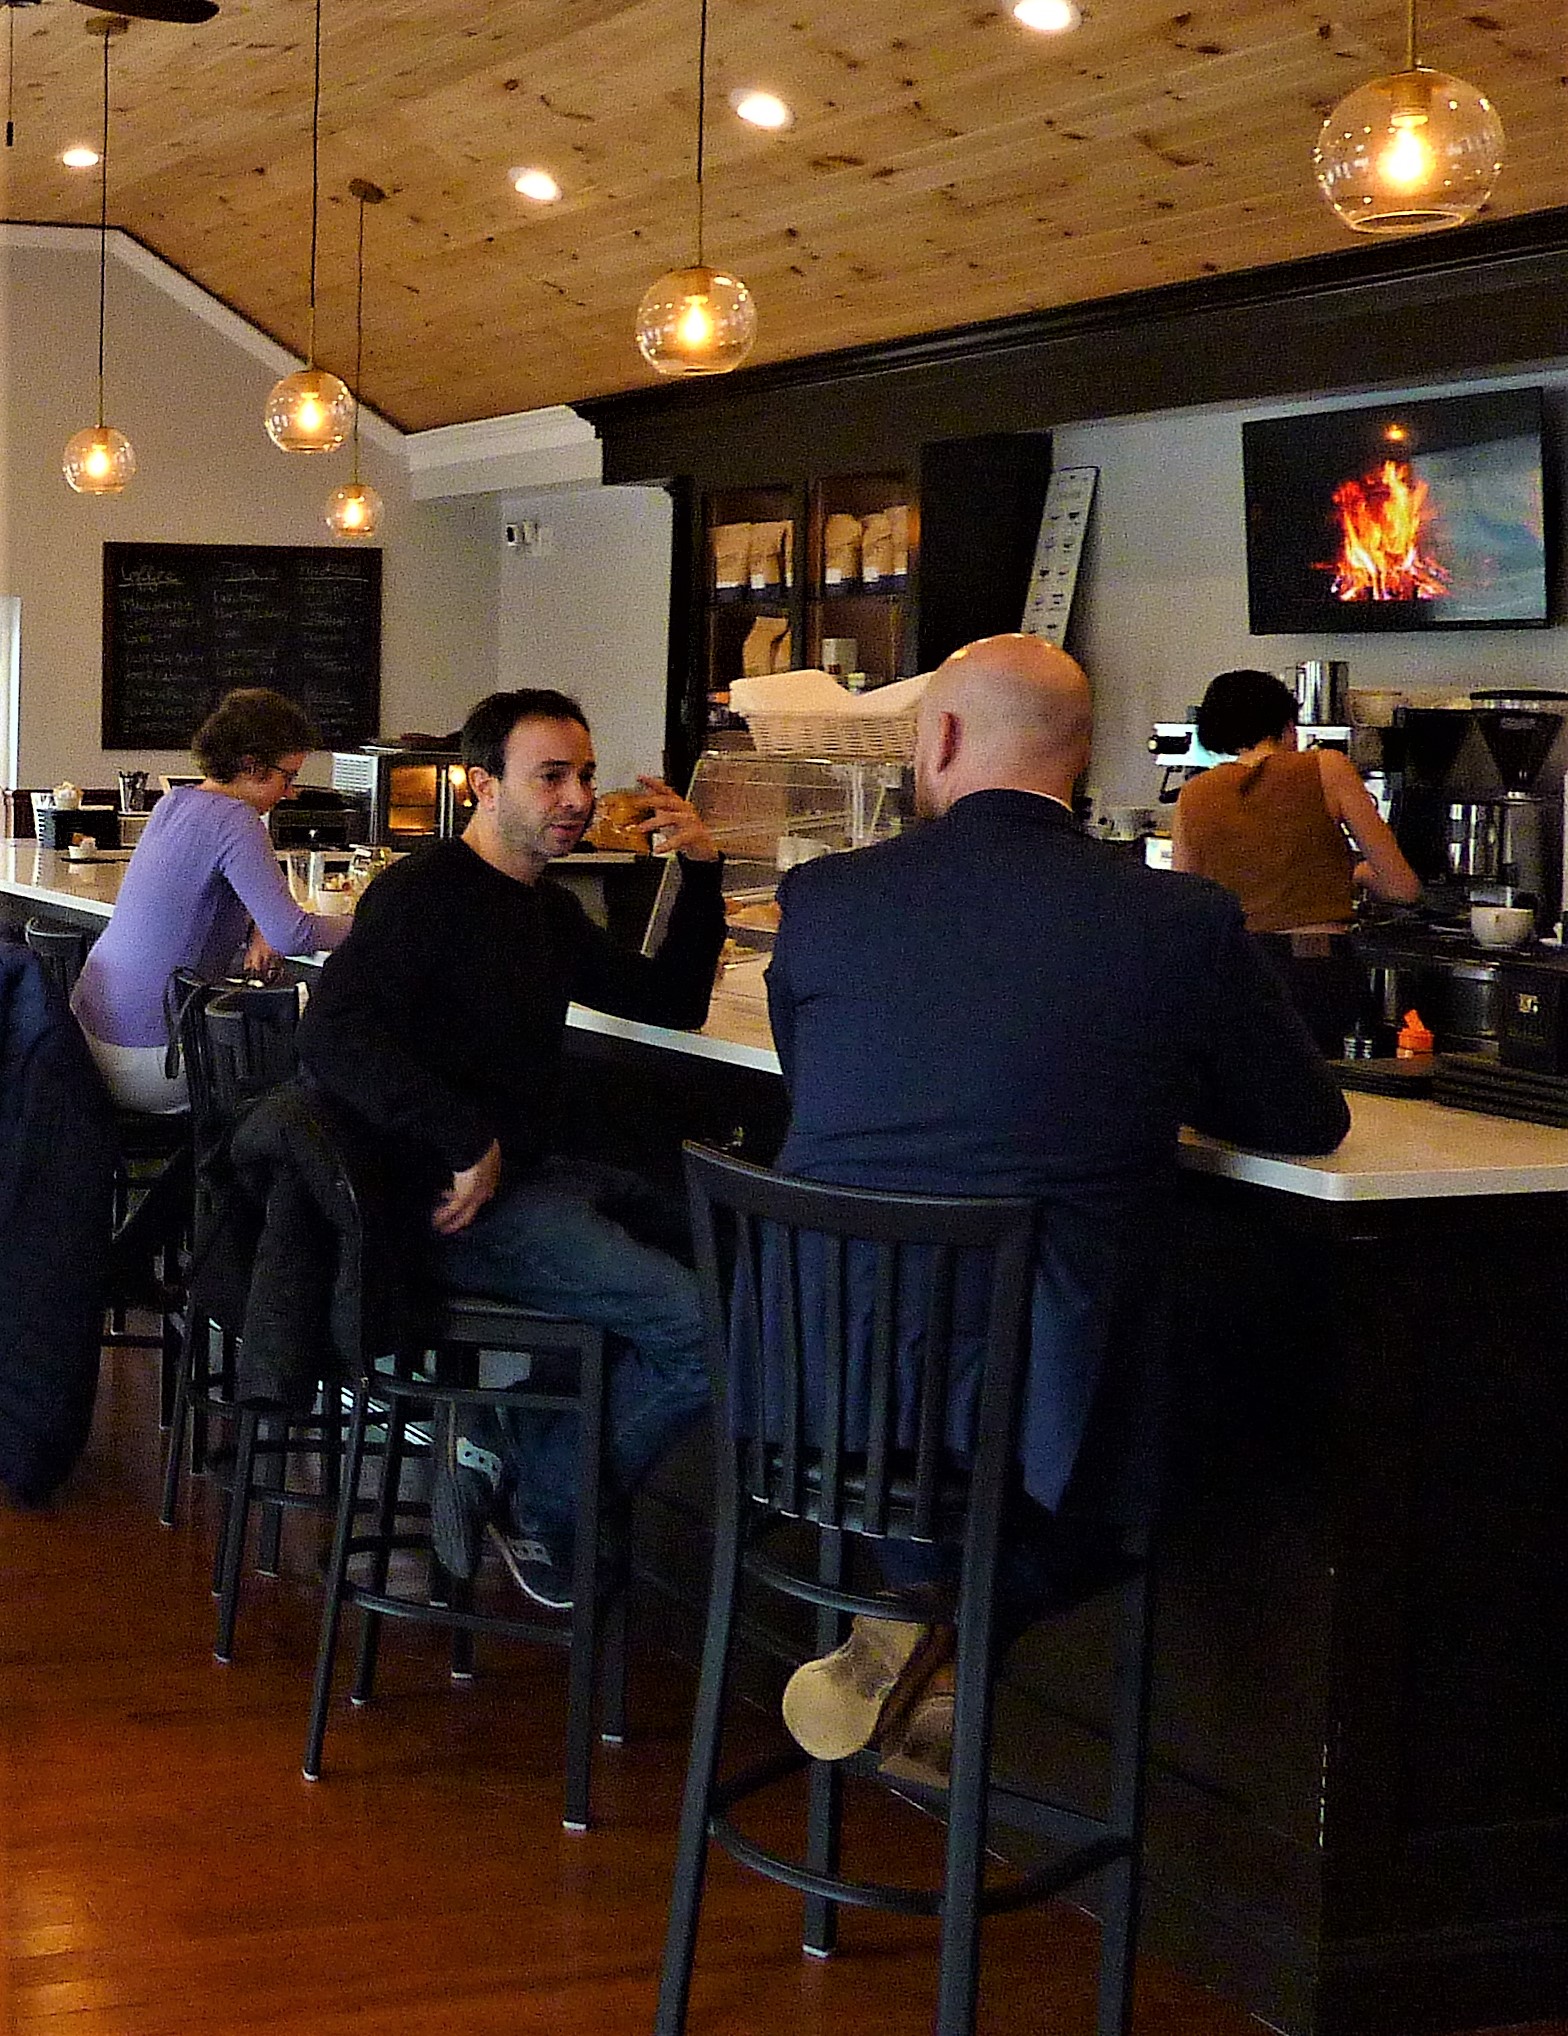 Alan Sky, owner of Millis Clicquot Coffee talks with a customer at the bar.